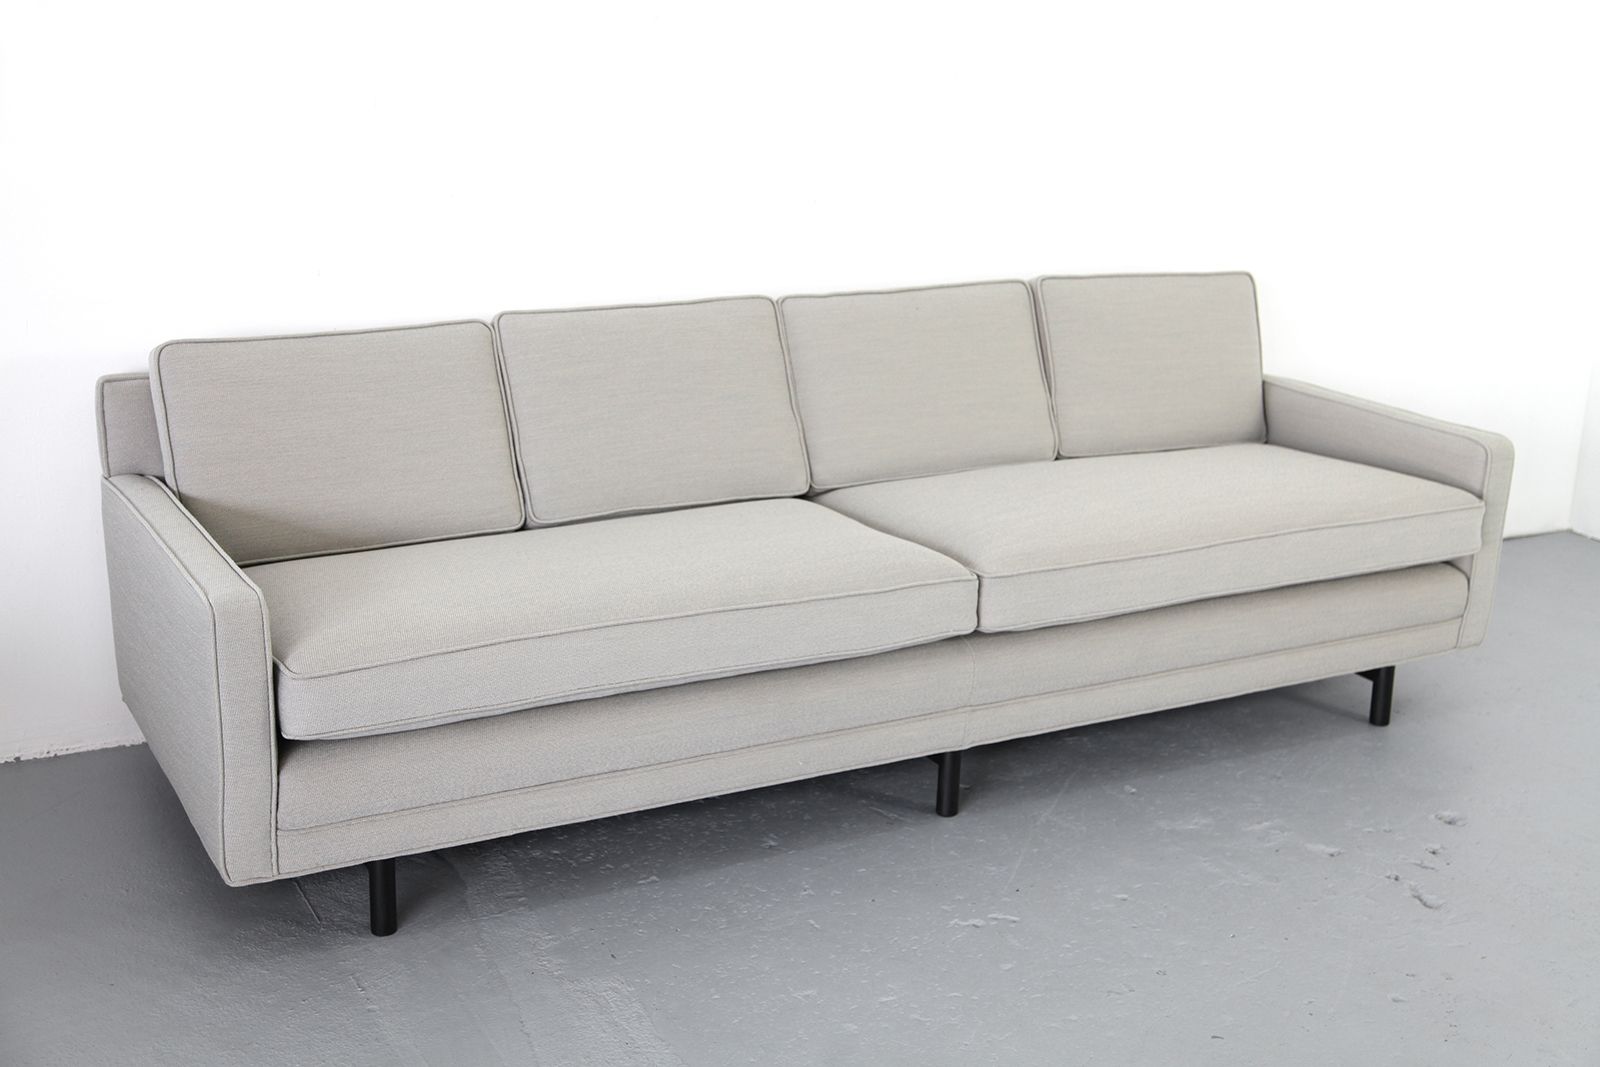 4 Seater Sofa Paul Mccobb For Directional For Sale At Pamono Pertaining To Four Seater Sofas (View 1 of 15)